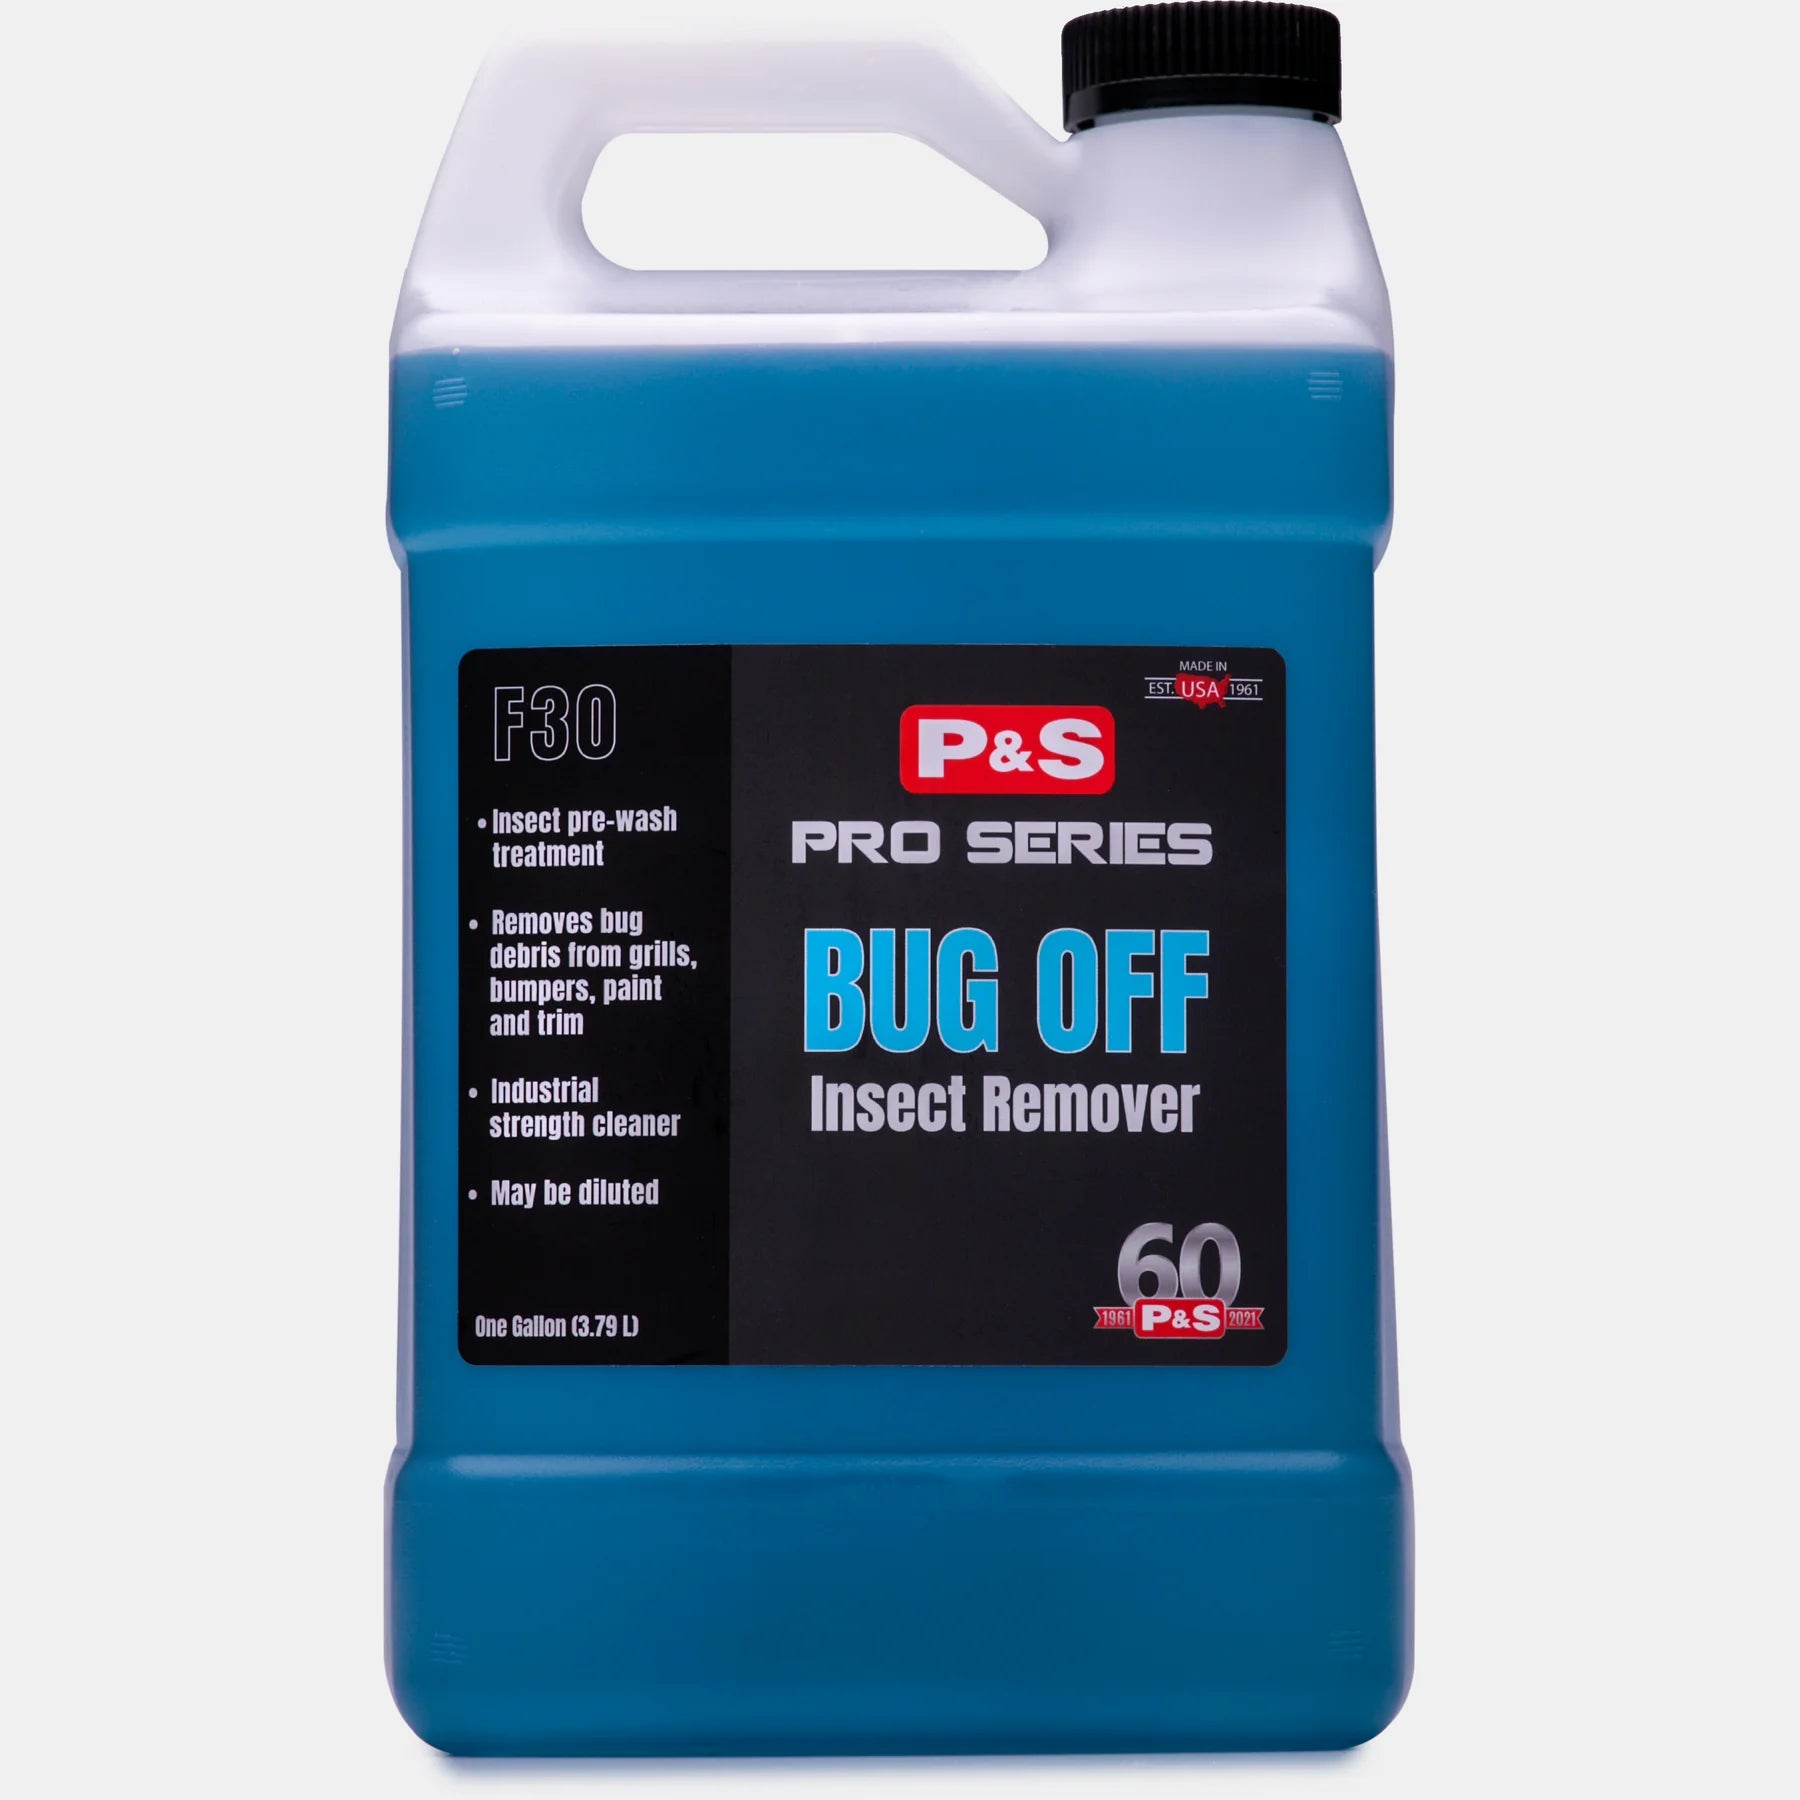 Front view of the one-gallon P&S Bug Off Insect Remover, showcasing the product details and usage instructions.